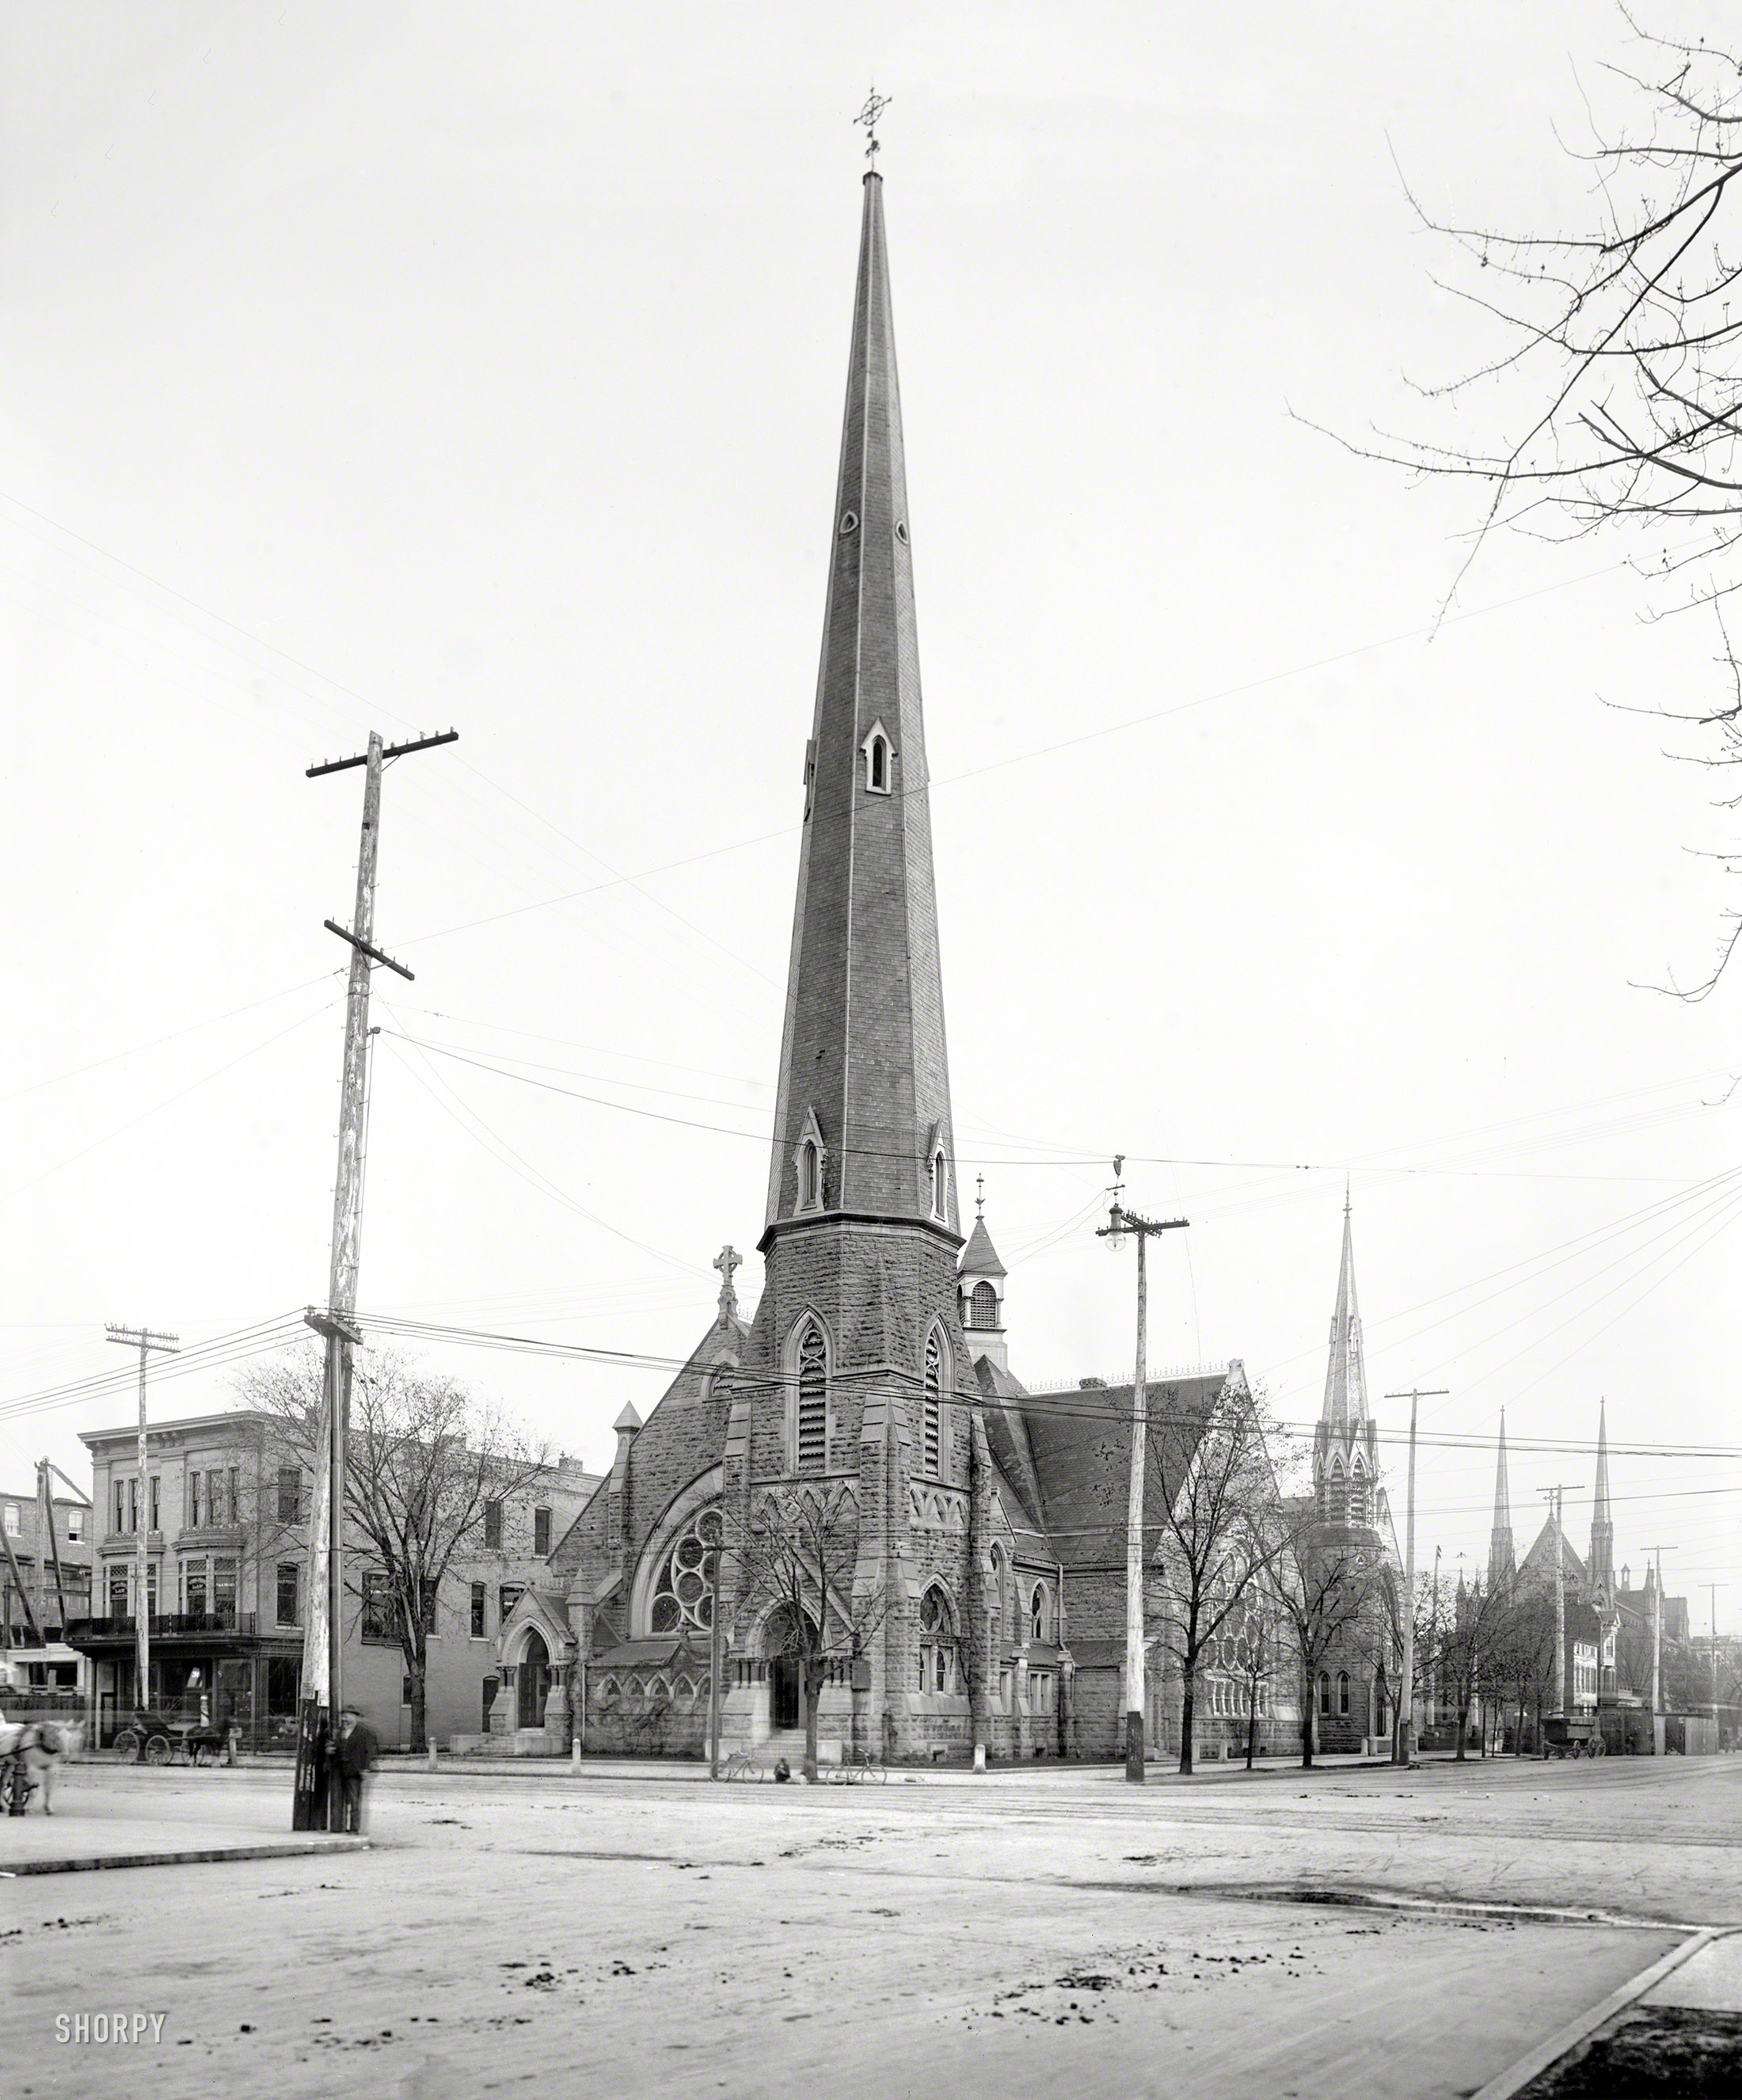 Dayton, Ohio, circa 1902. "Third Street Presbyterian Church." Scrolling top to bottom in Full Size mode, you get a nice visual allegory: Heaven to Earthy. 8x10 inch dry plate glass negative, Detroit Publishing Company. View full size.